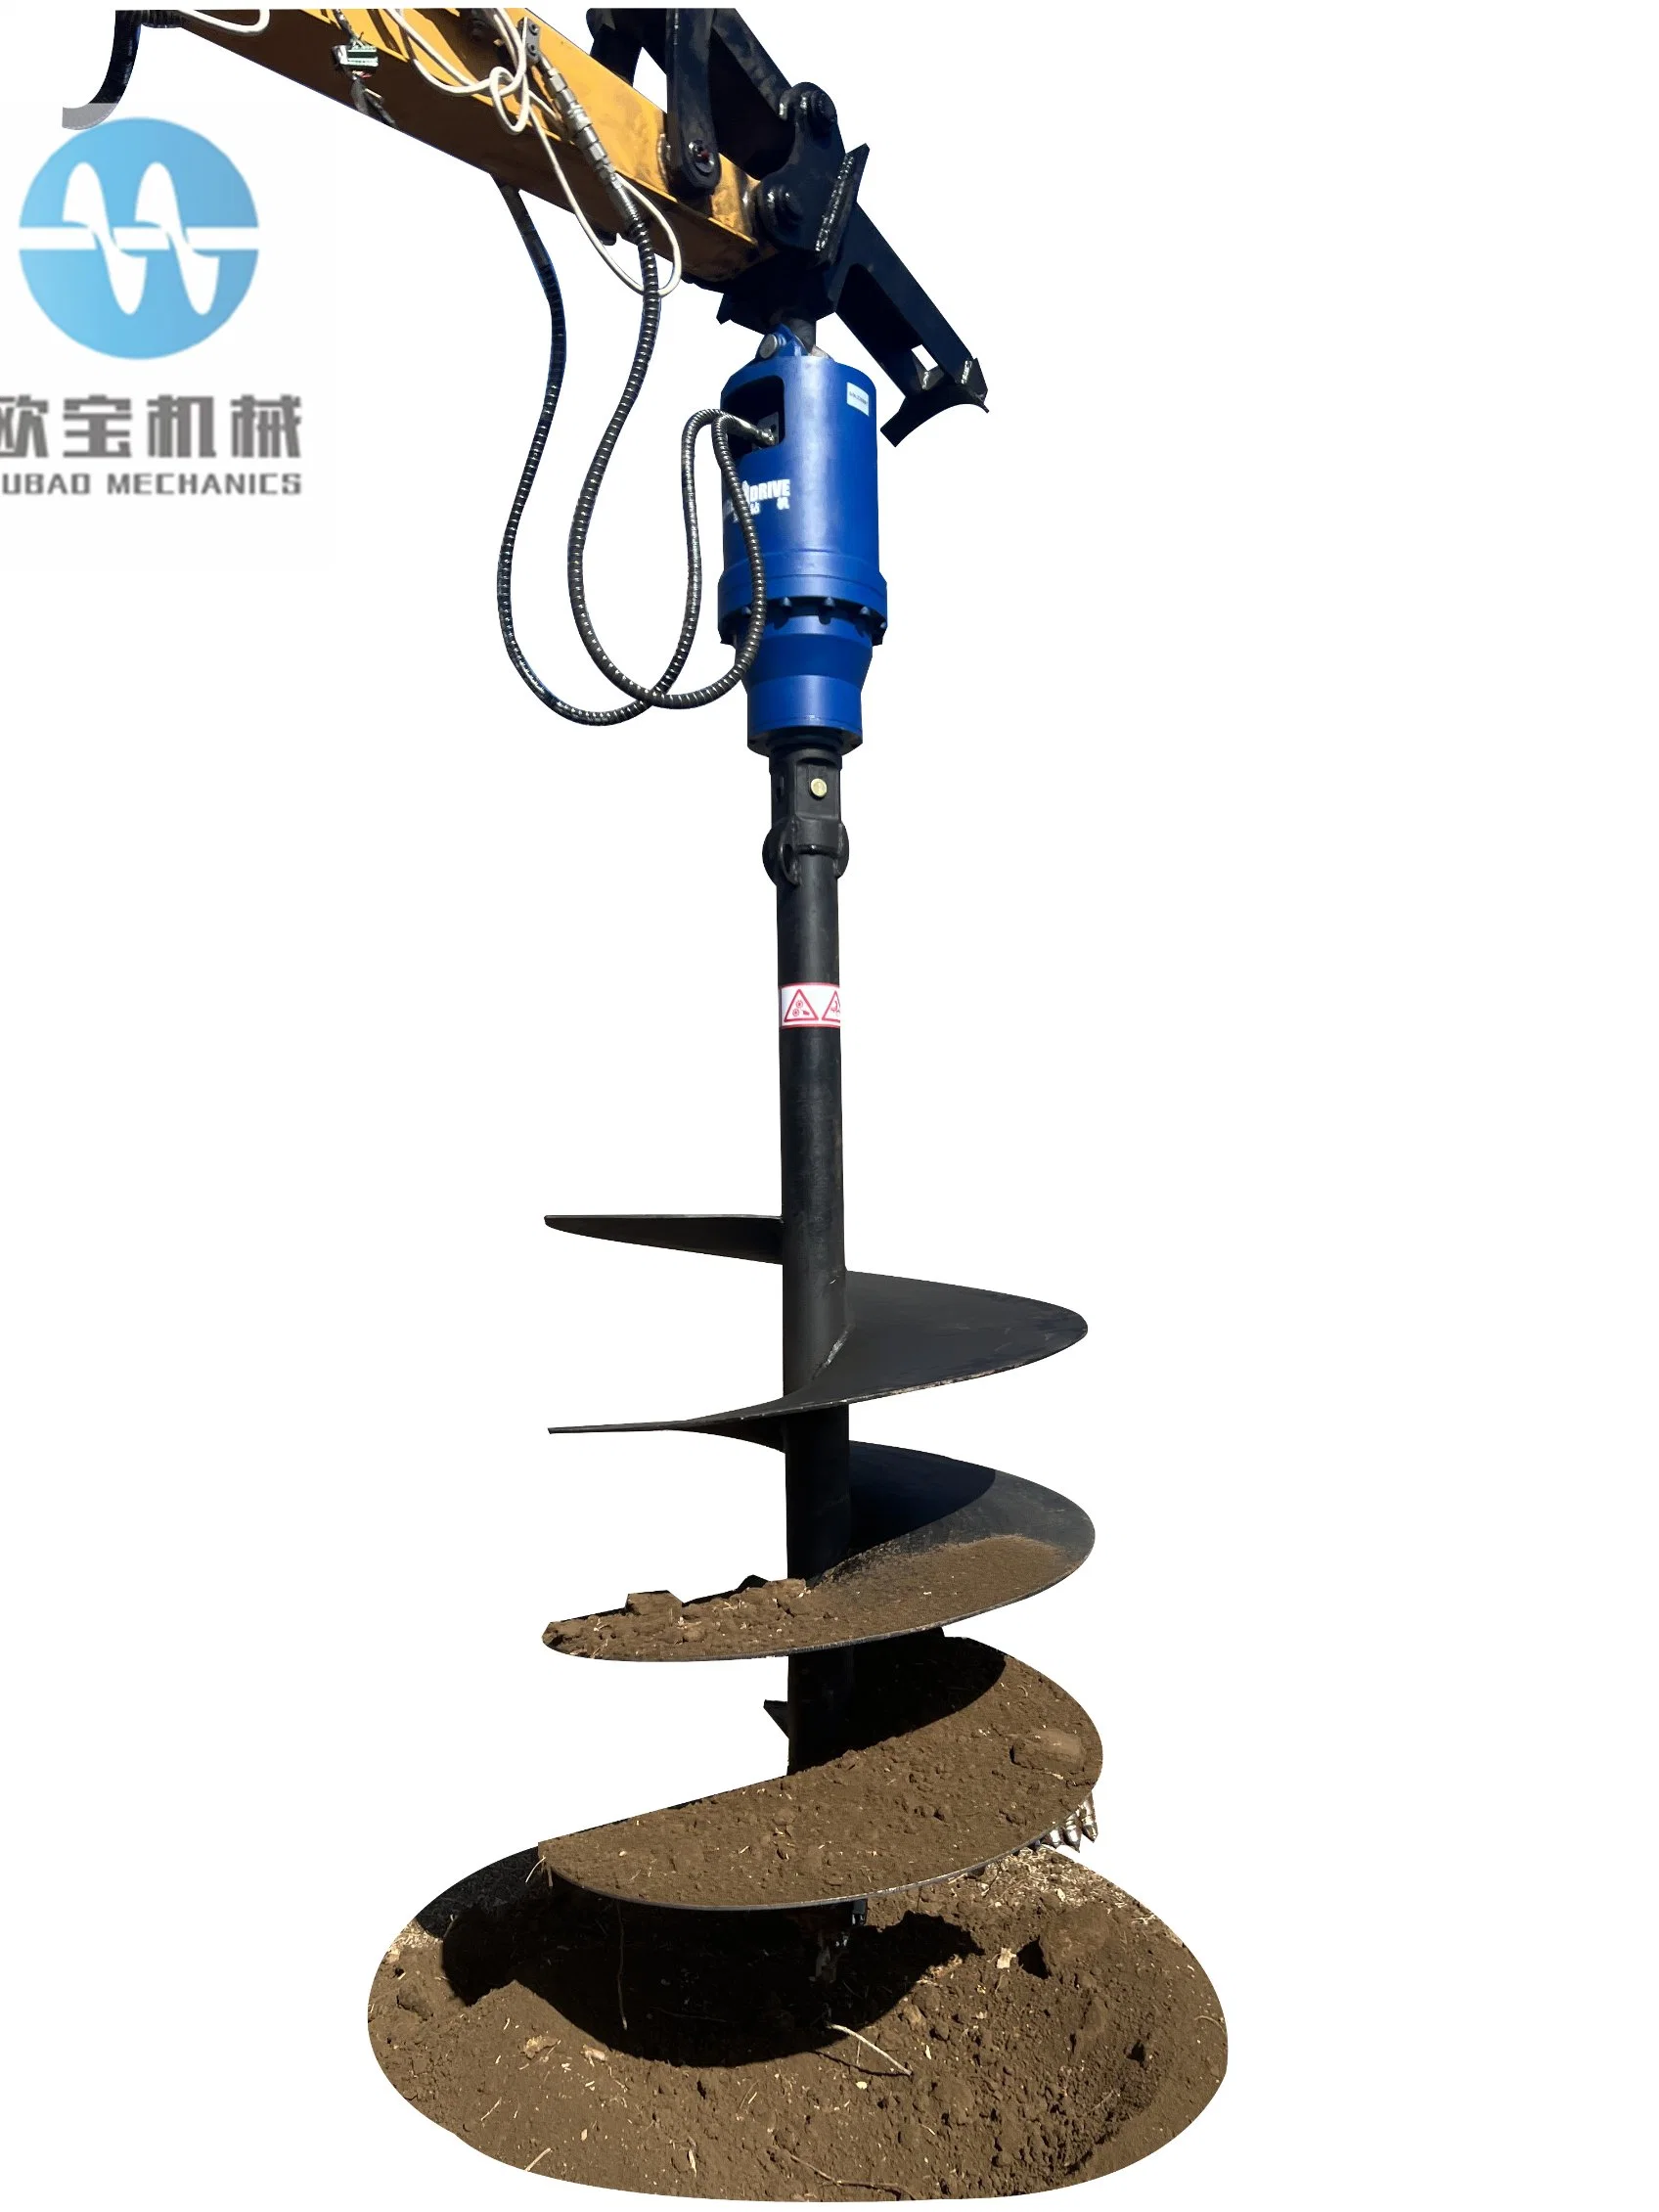 Sale Promotion Auger Drive Hydraulic Earth Auger Drill for Excavator